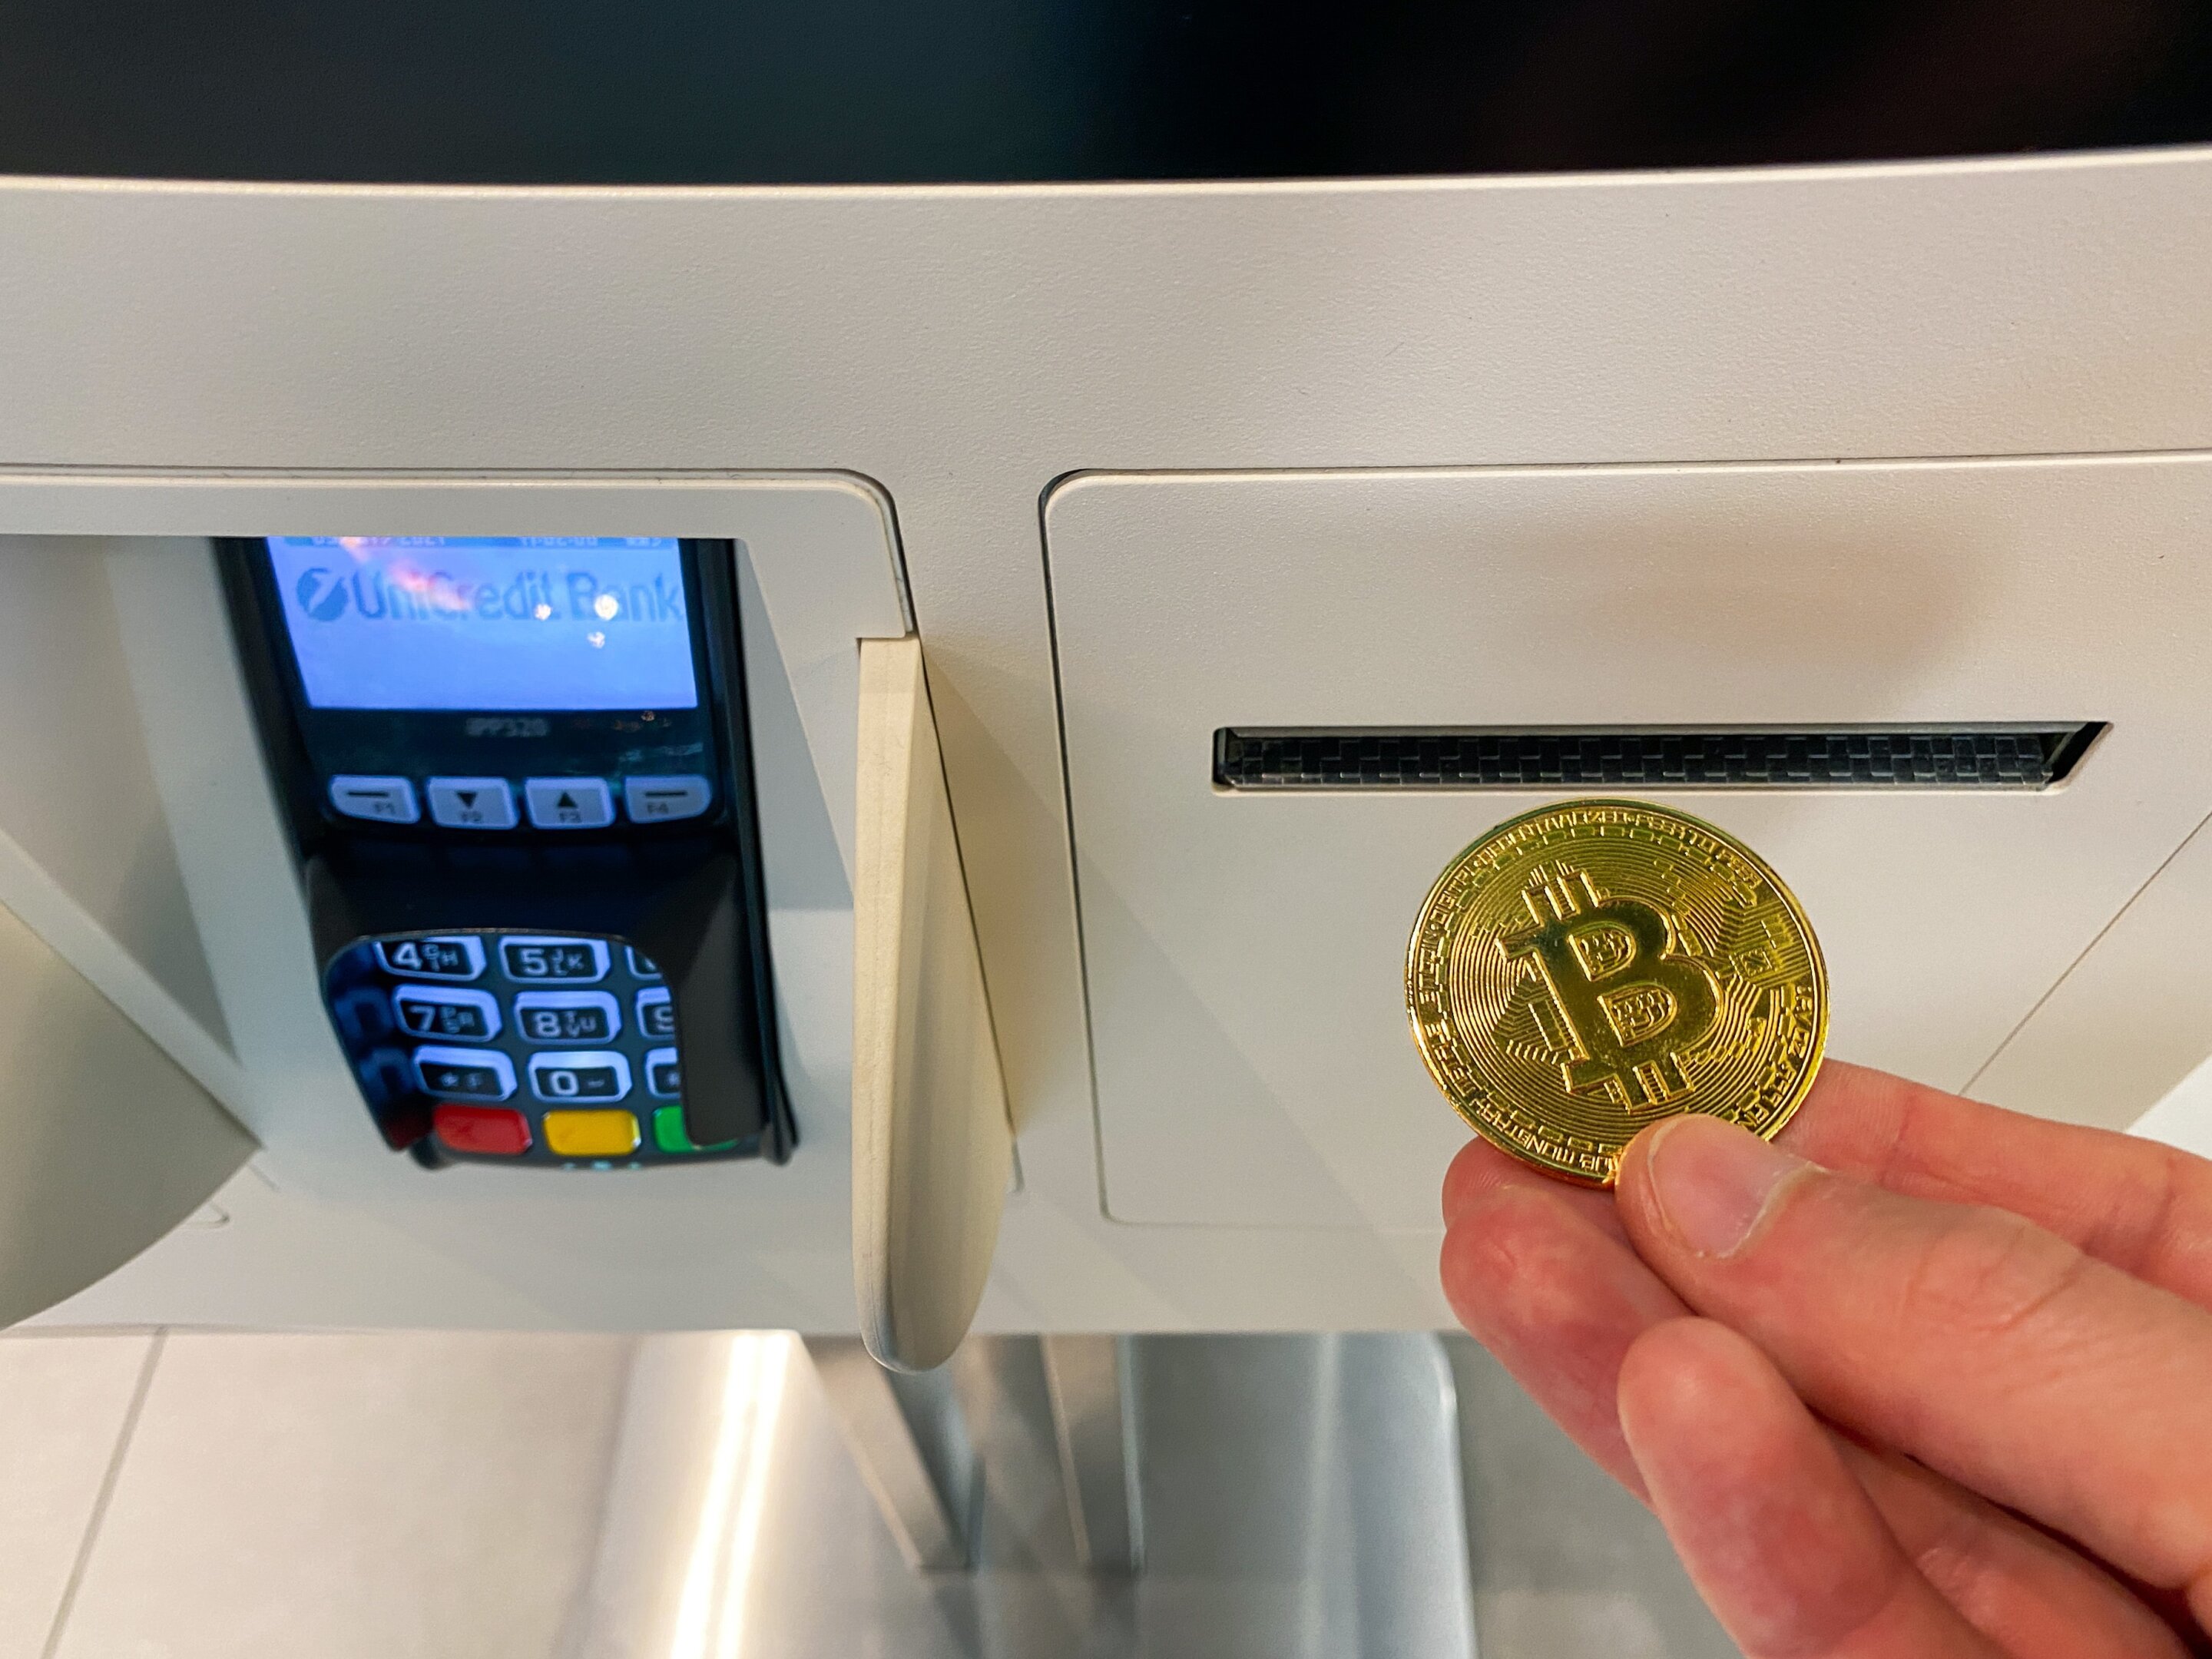 What is a Bitcoin ATM, and how do you use one?